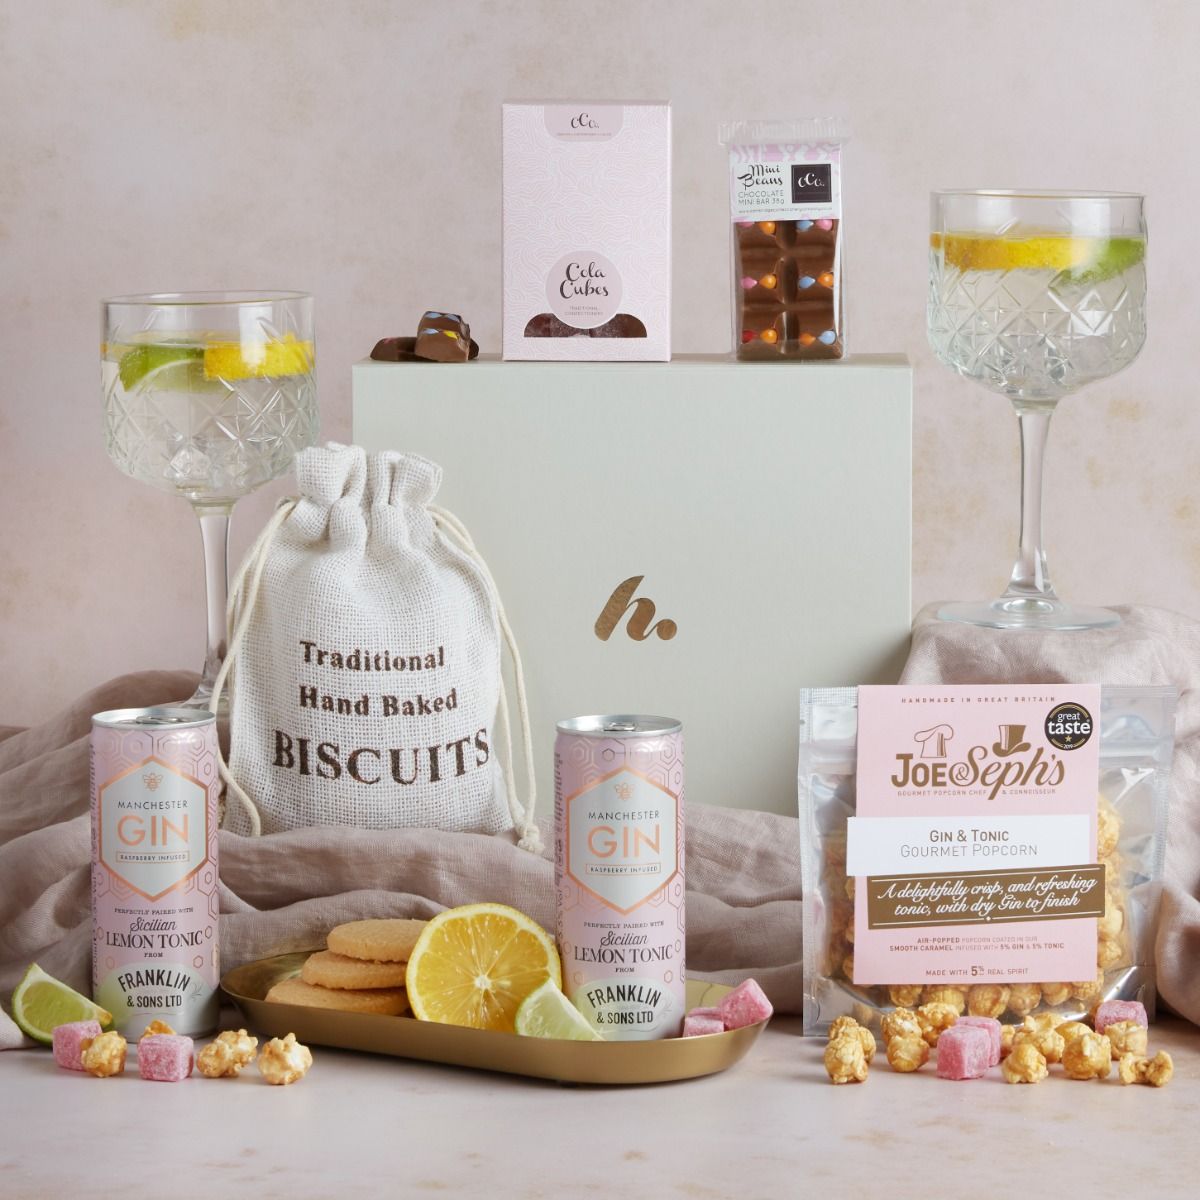 Gin and Treats gift with contents on display and signature hampers box